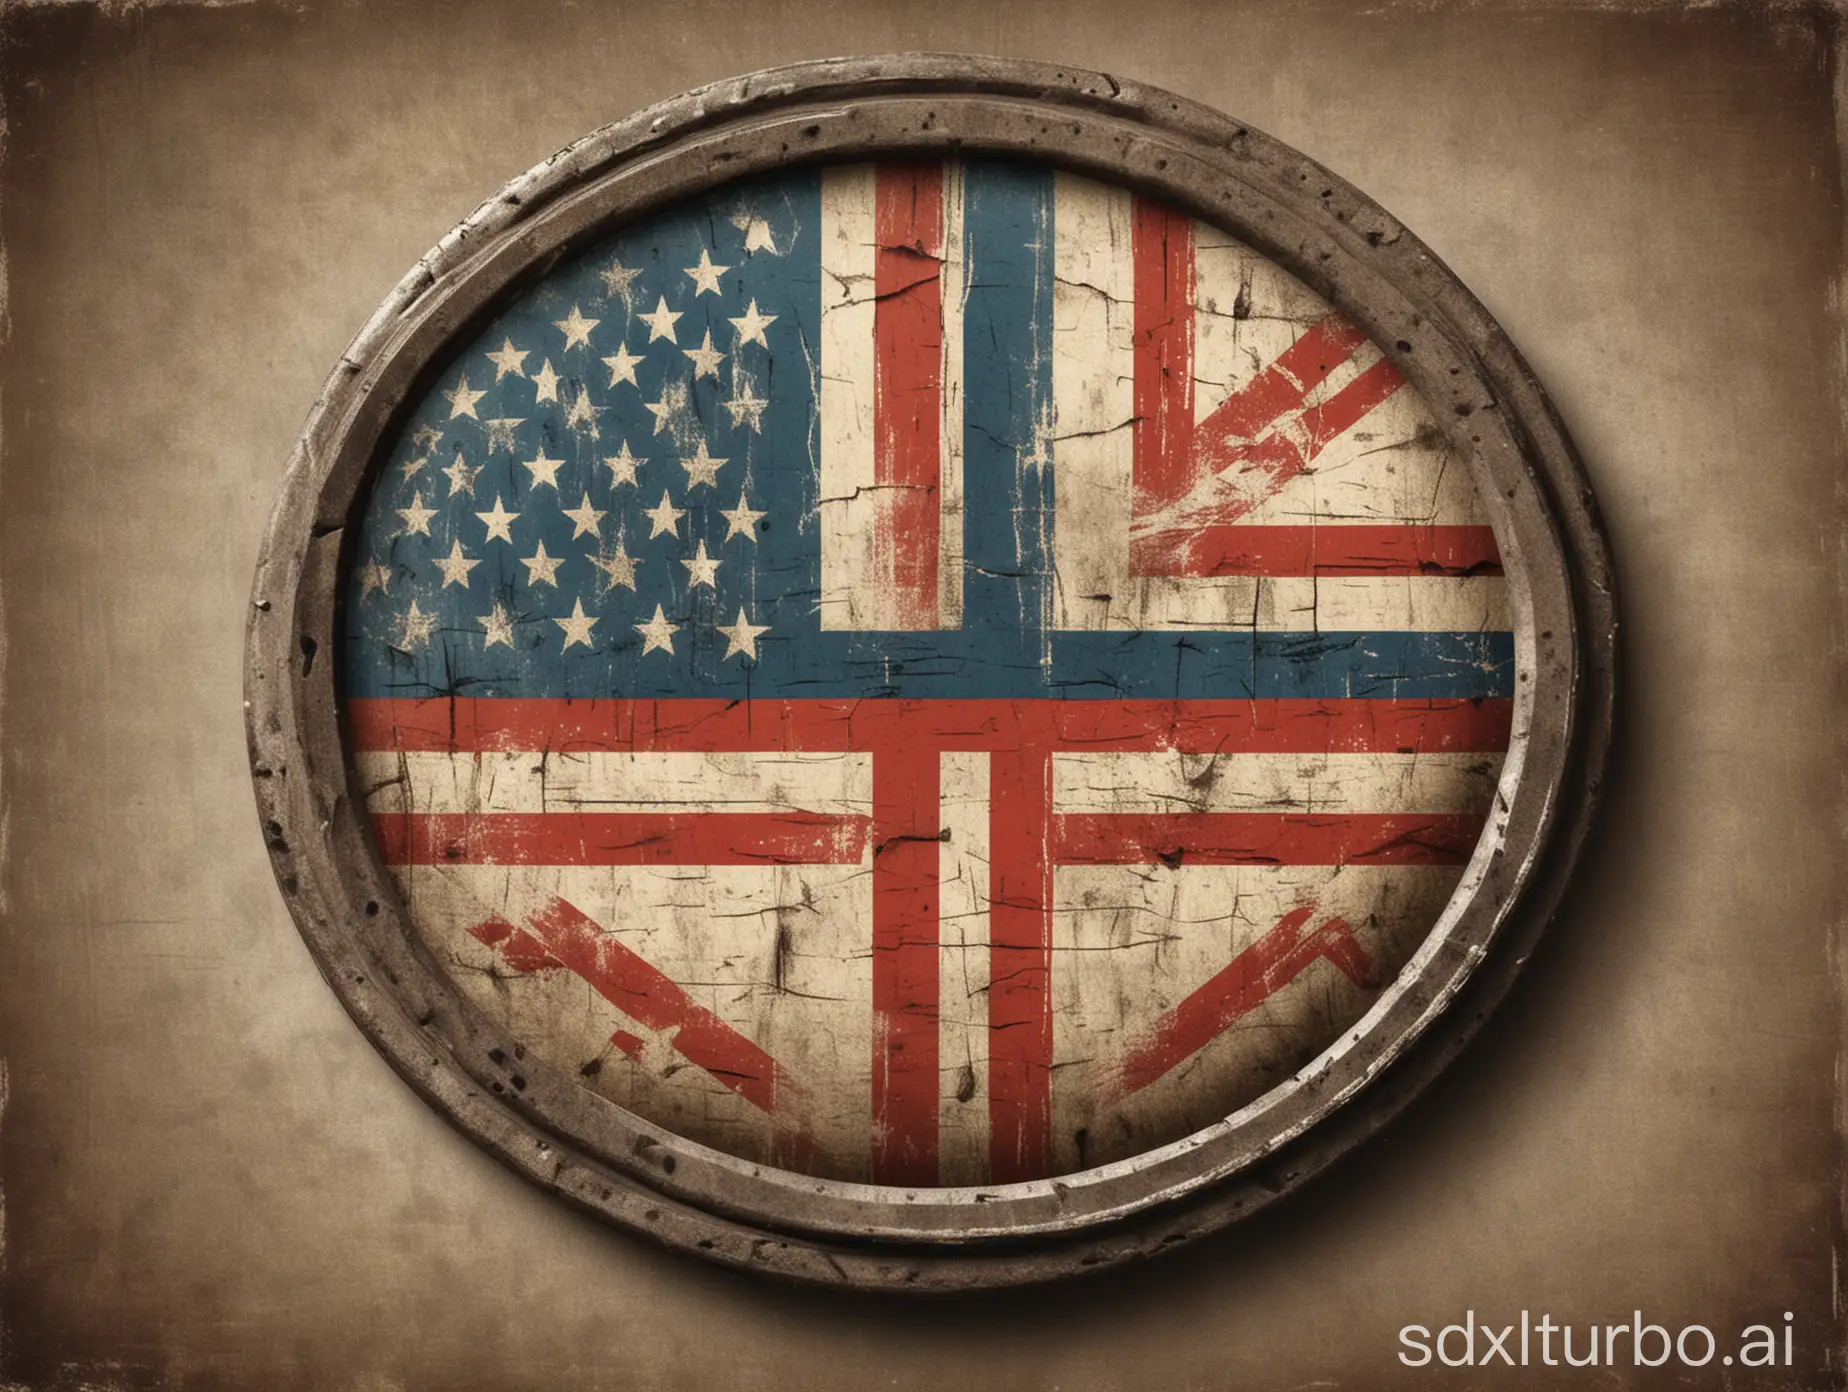 A retro-inspired logo design featuring a stylized American flag with a distressed, vintage texture and patriotic typography in a circular emblem.